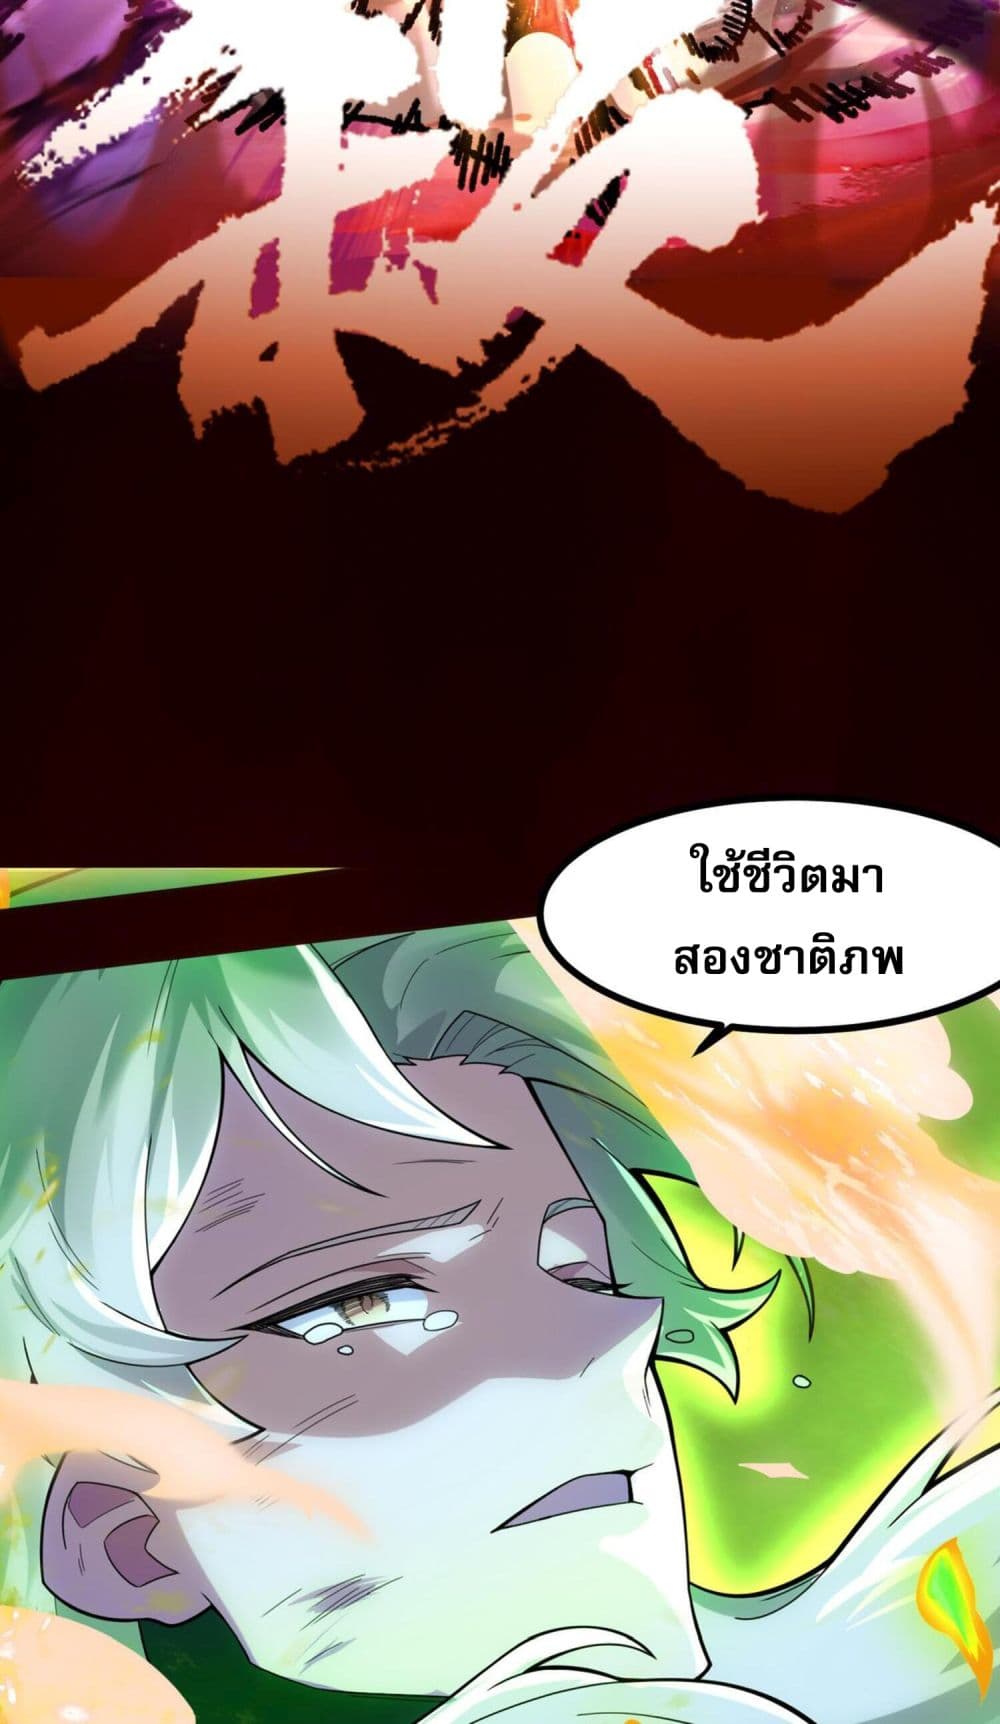 I Have Hundreds of Millions of Years of Cultivation ข้ามีพลังบำเพ็ญหนึ่งล้านปี 1-1